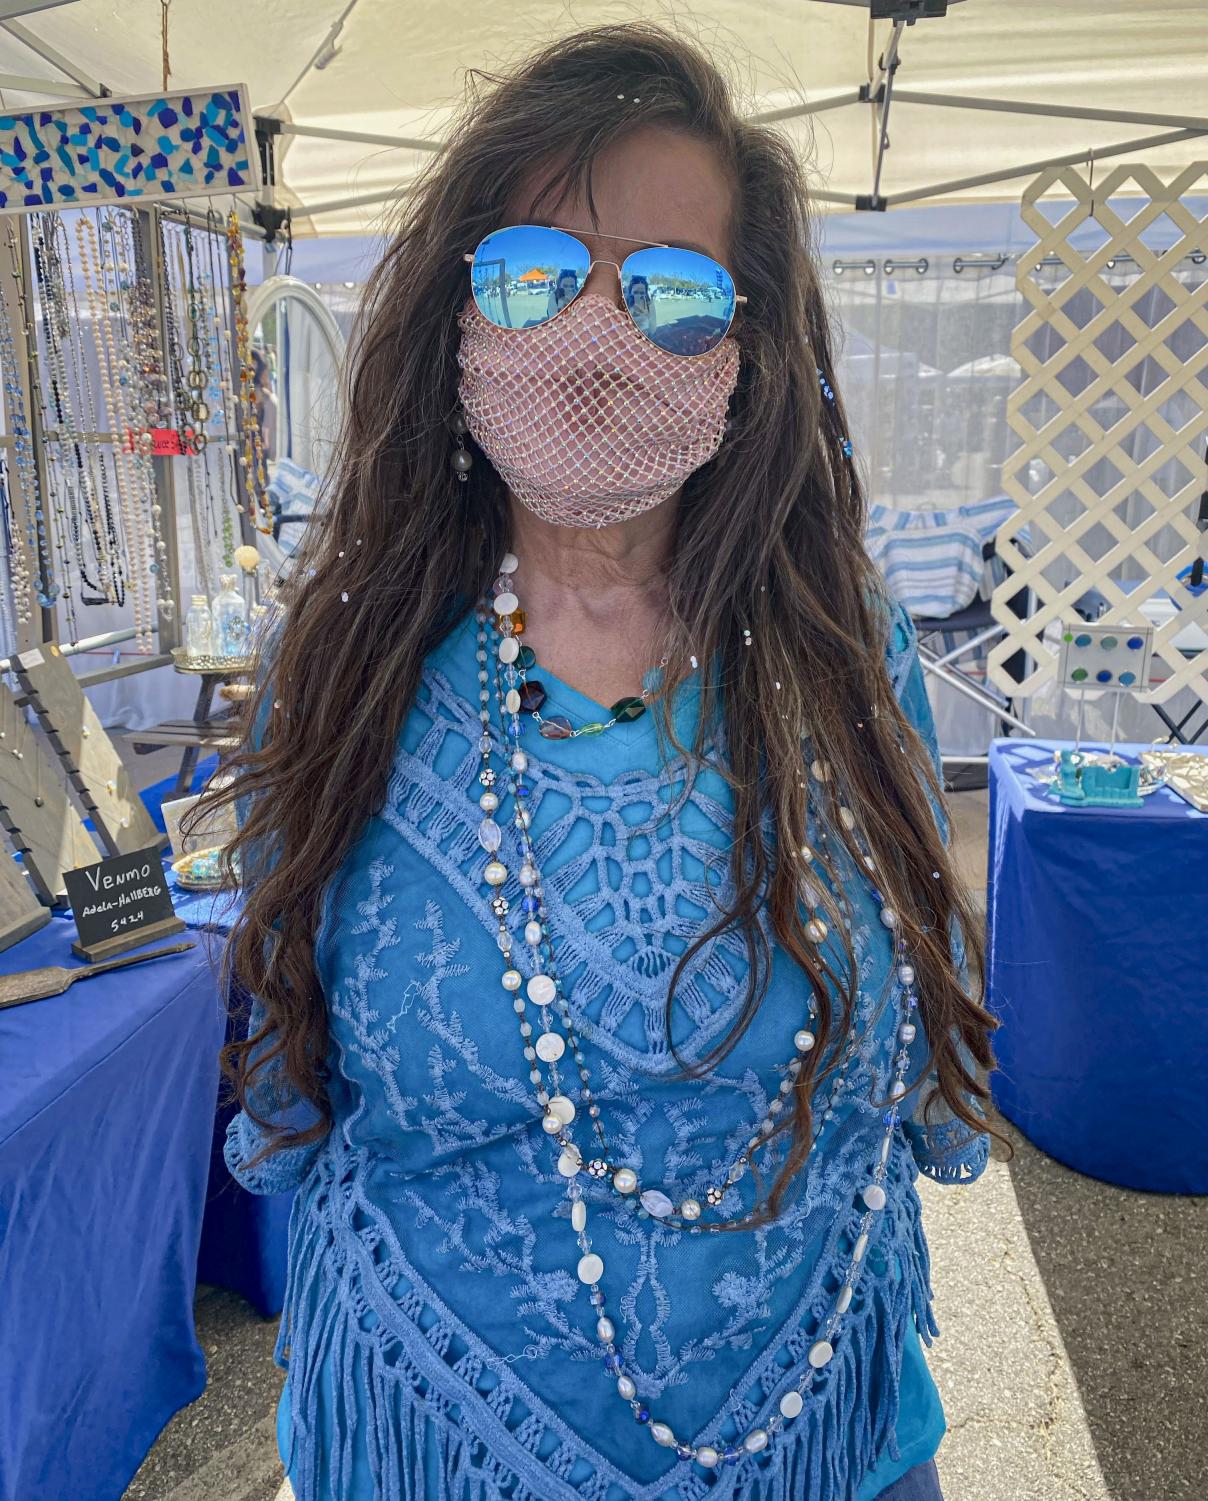 Adela Hallberg, owner of “Vintage Sea Cottage”, shows off her hand made necklaces that she is wearing, along with the “mermaid sparkles” that she has in her hair on Saturday, February 27 in Thousand Oaks, CA.